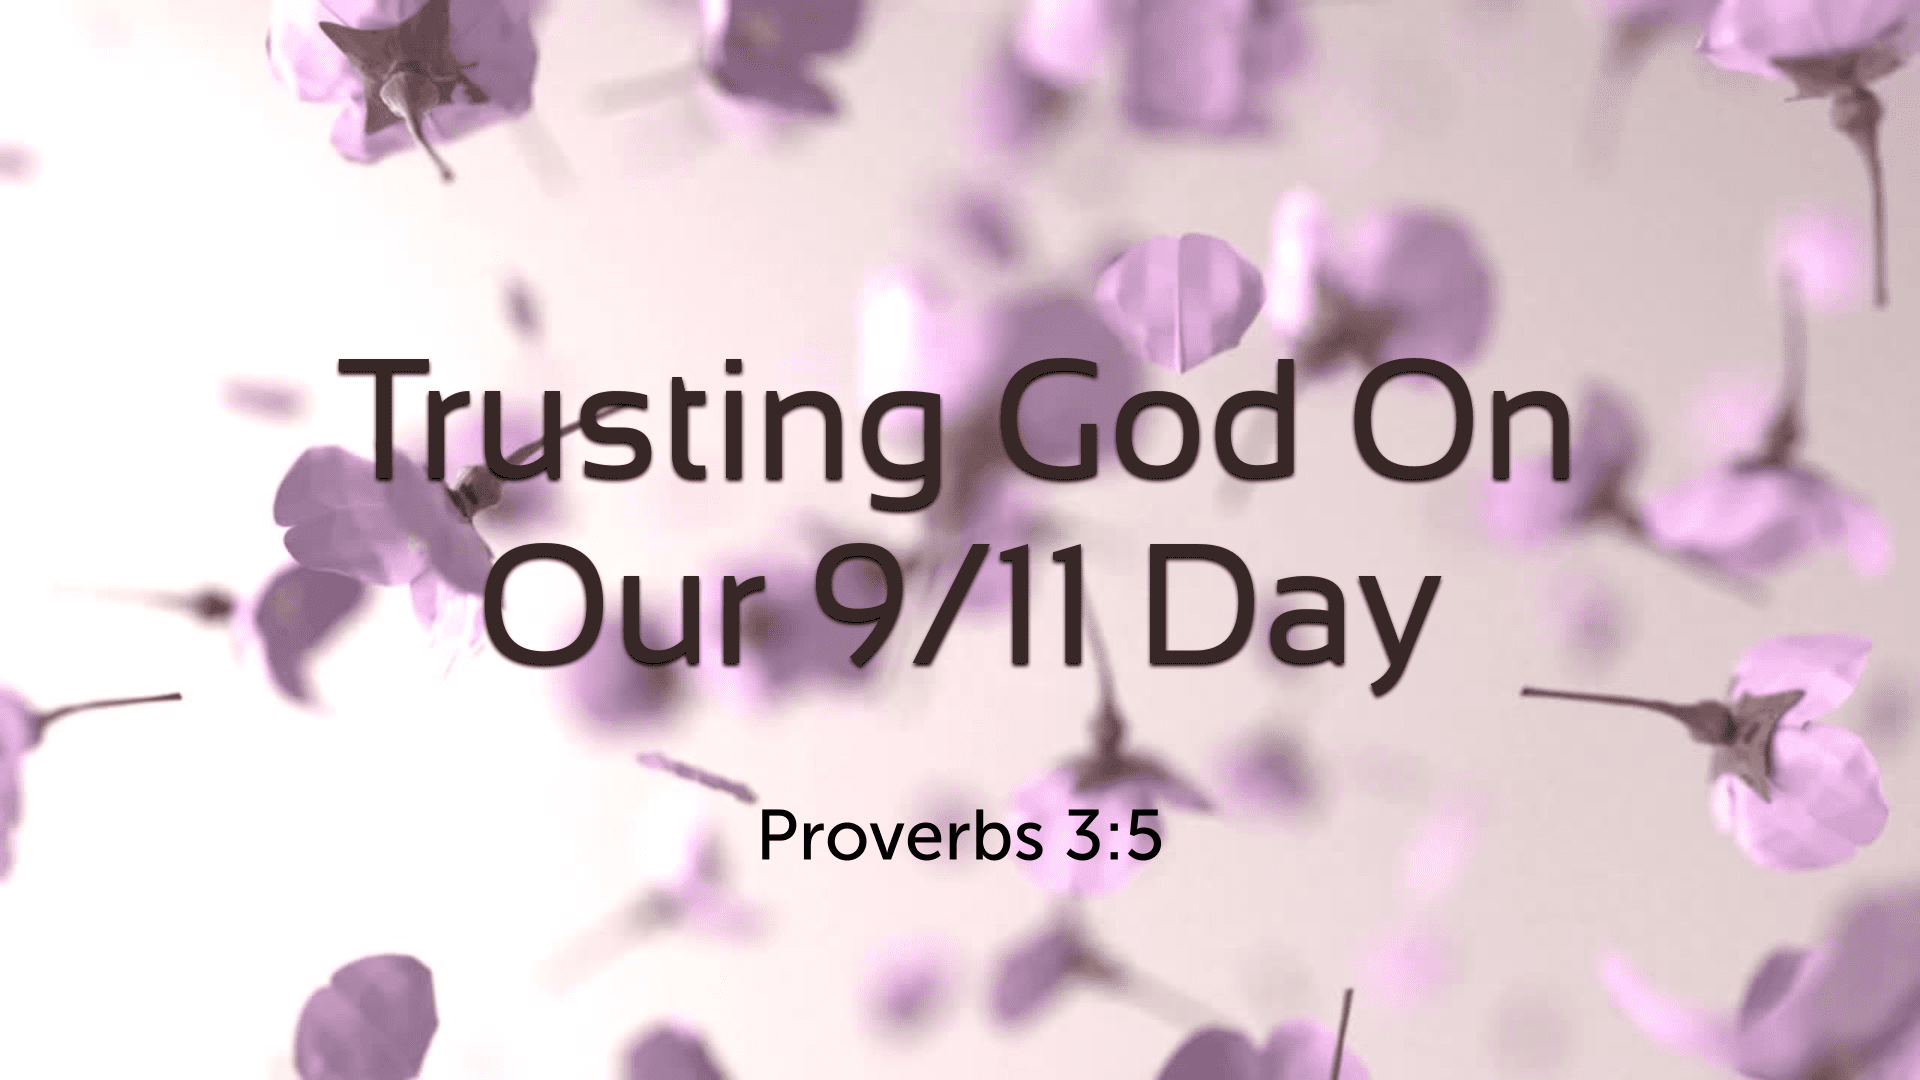 Trusting God On Our 9/11 Day